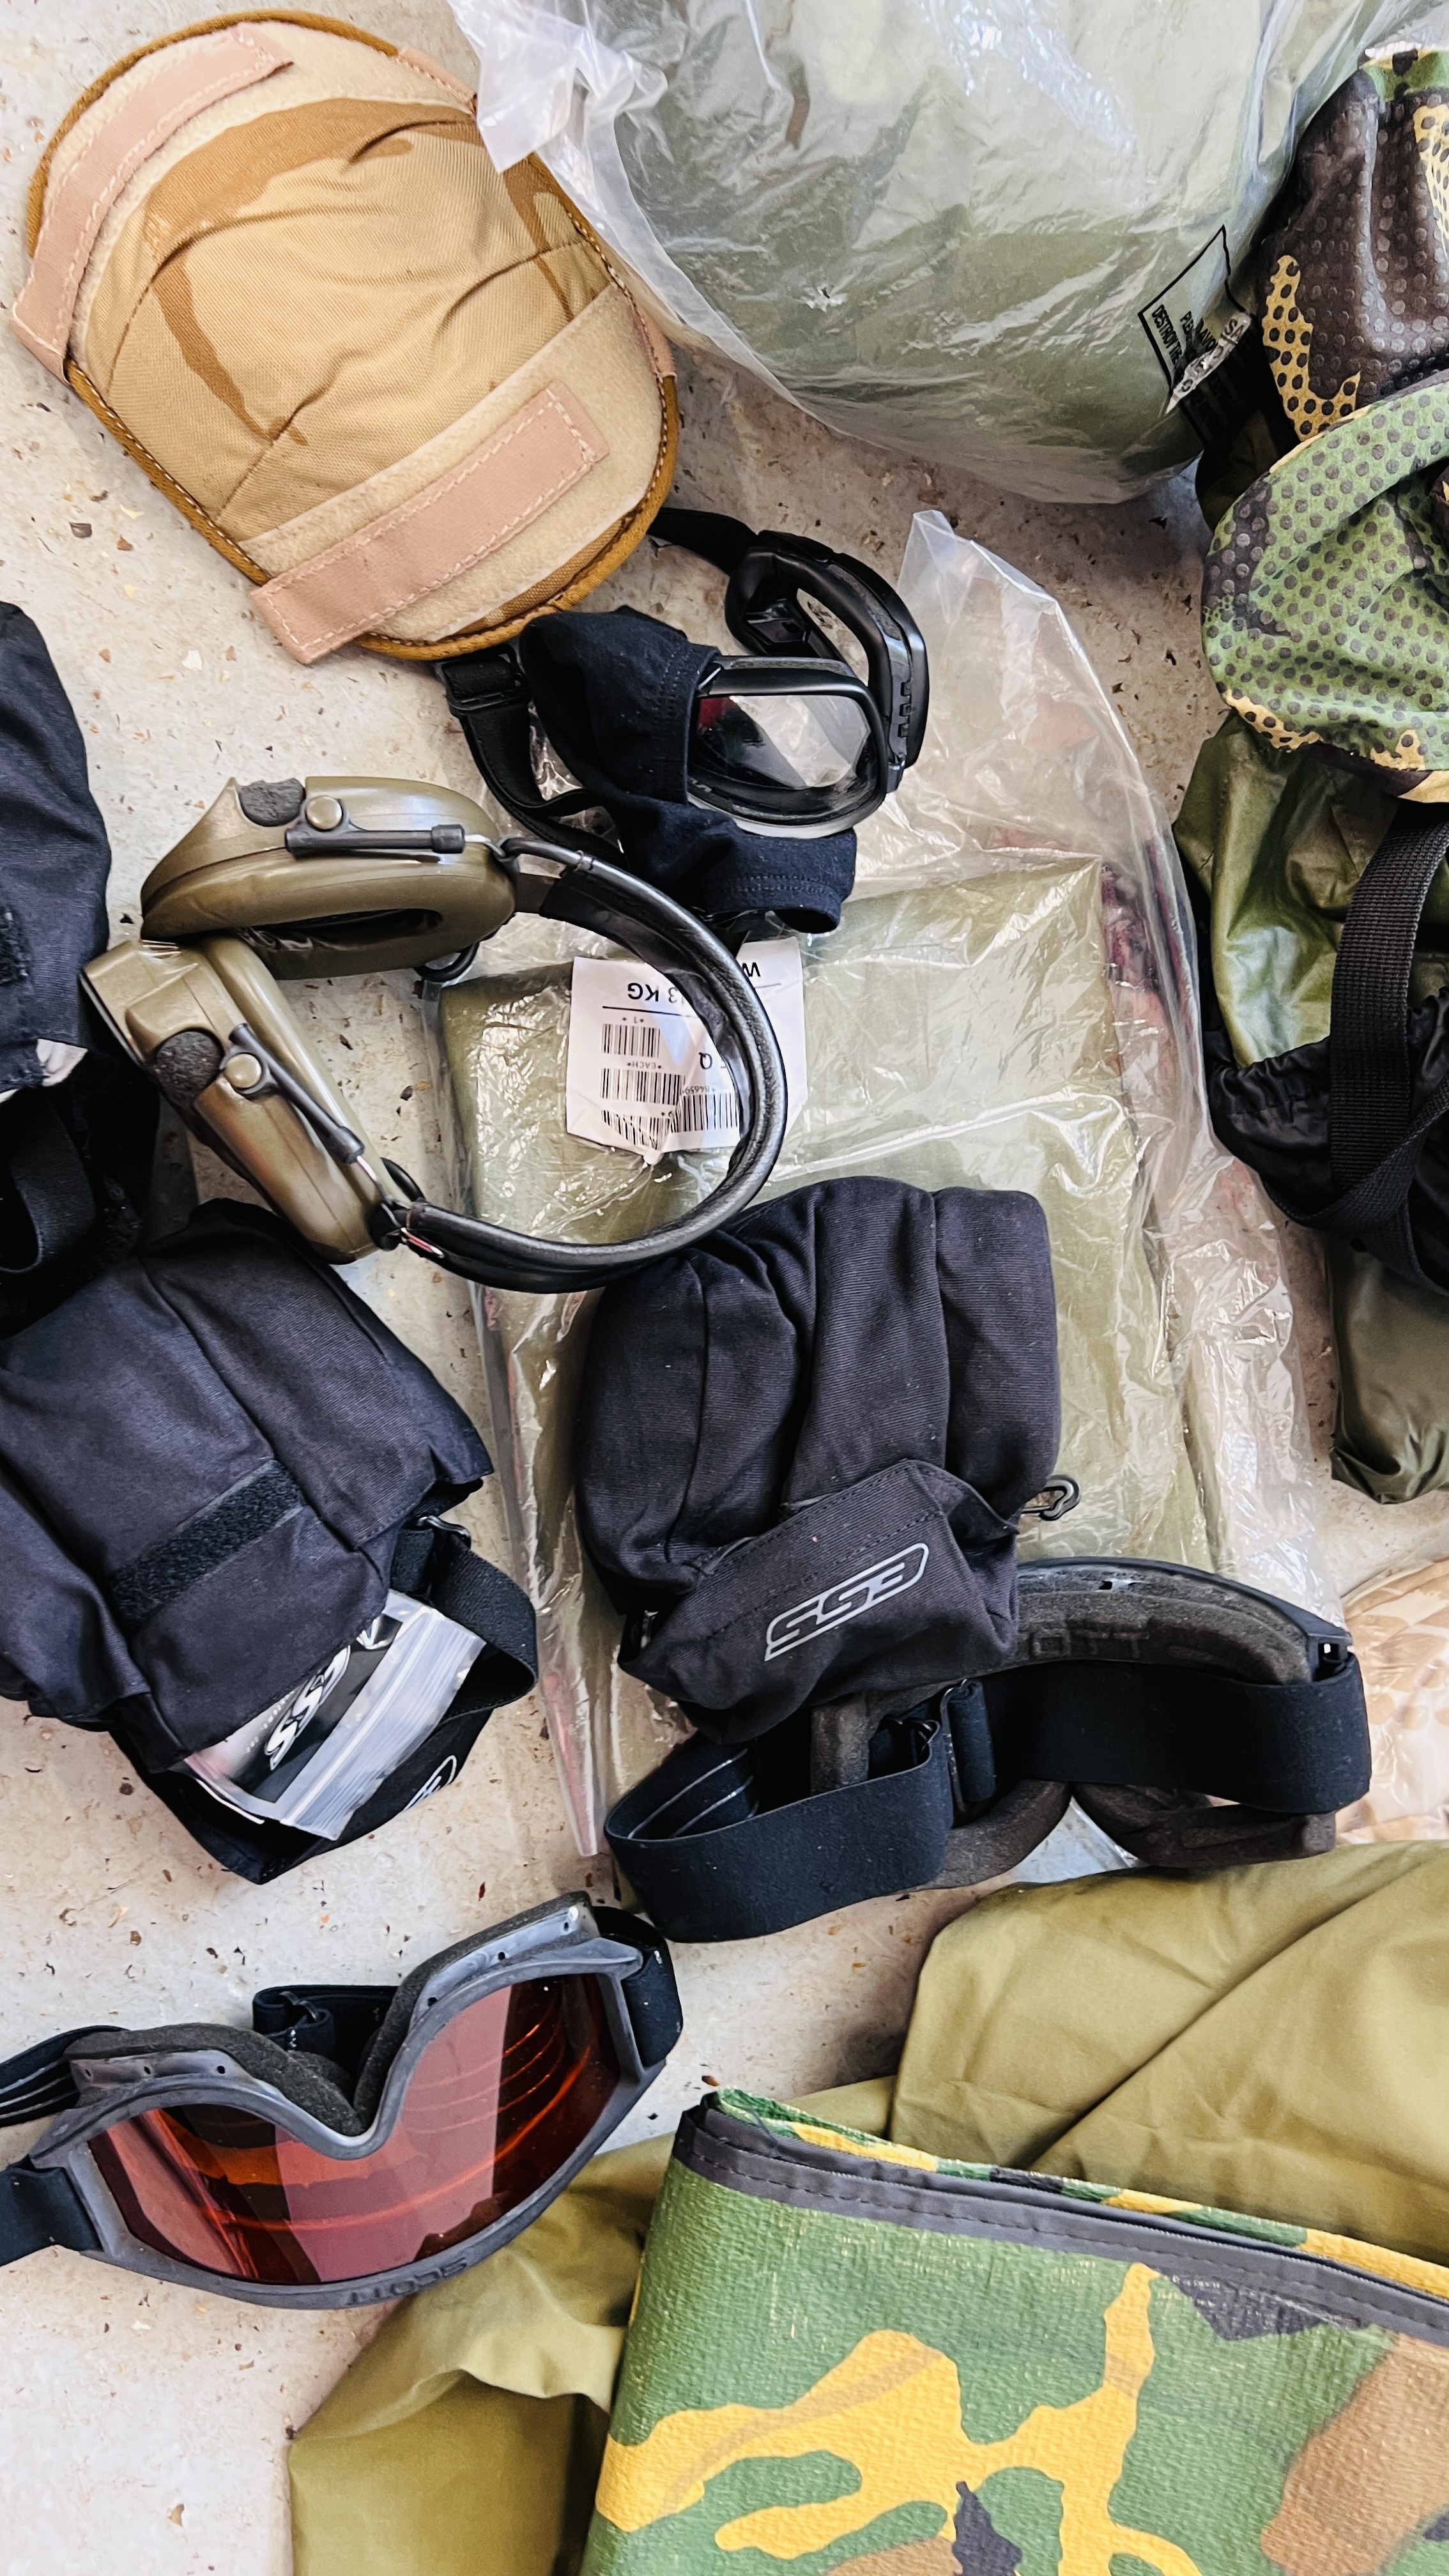 7 X KIT BAGS CONTAINING AN EXTENSIVE GROUP OF TACTICAL ARMY CLOTHING, BACK PACKS, - Image 11 of 24